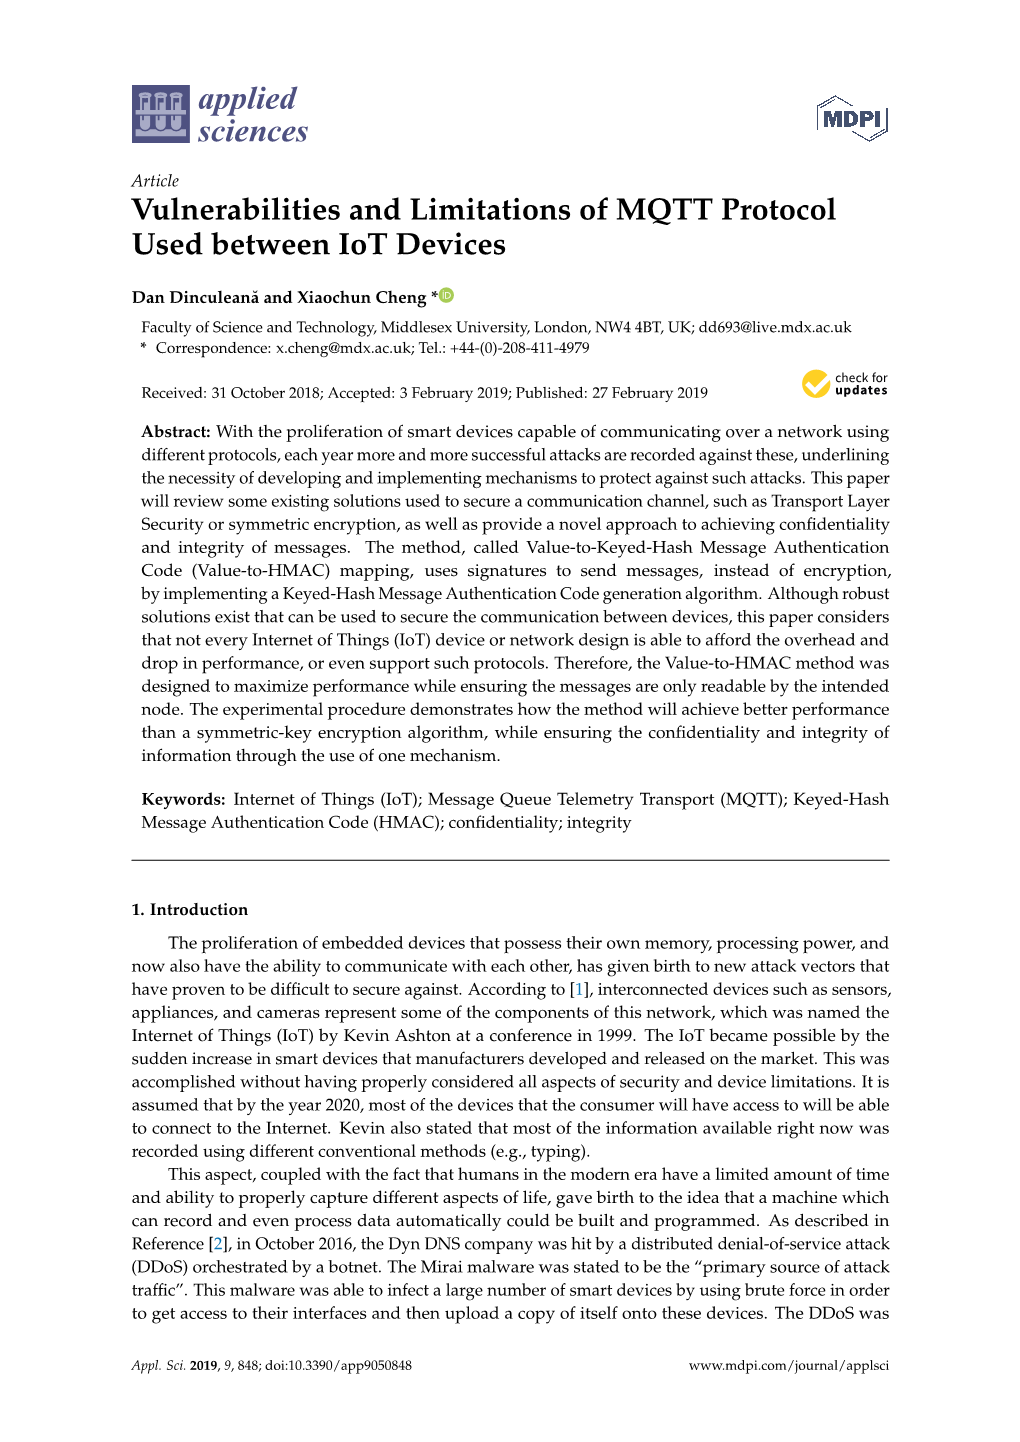 Vulnerabilities and Limitations of MQTT Protocol Used Between Iot Devices